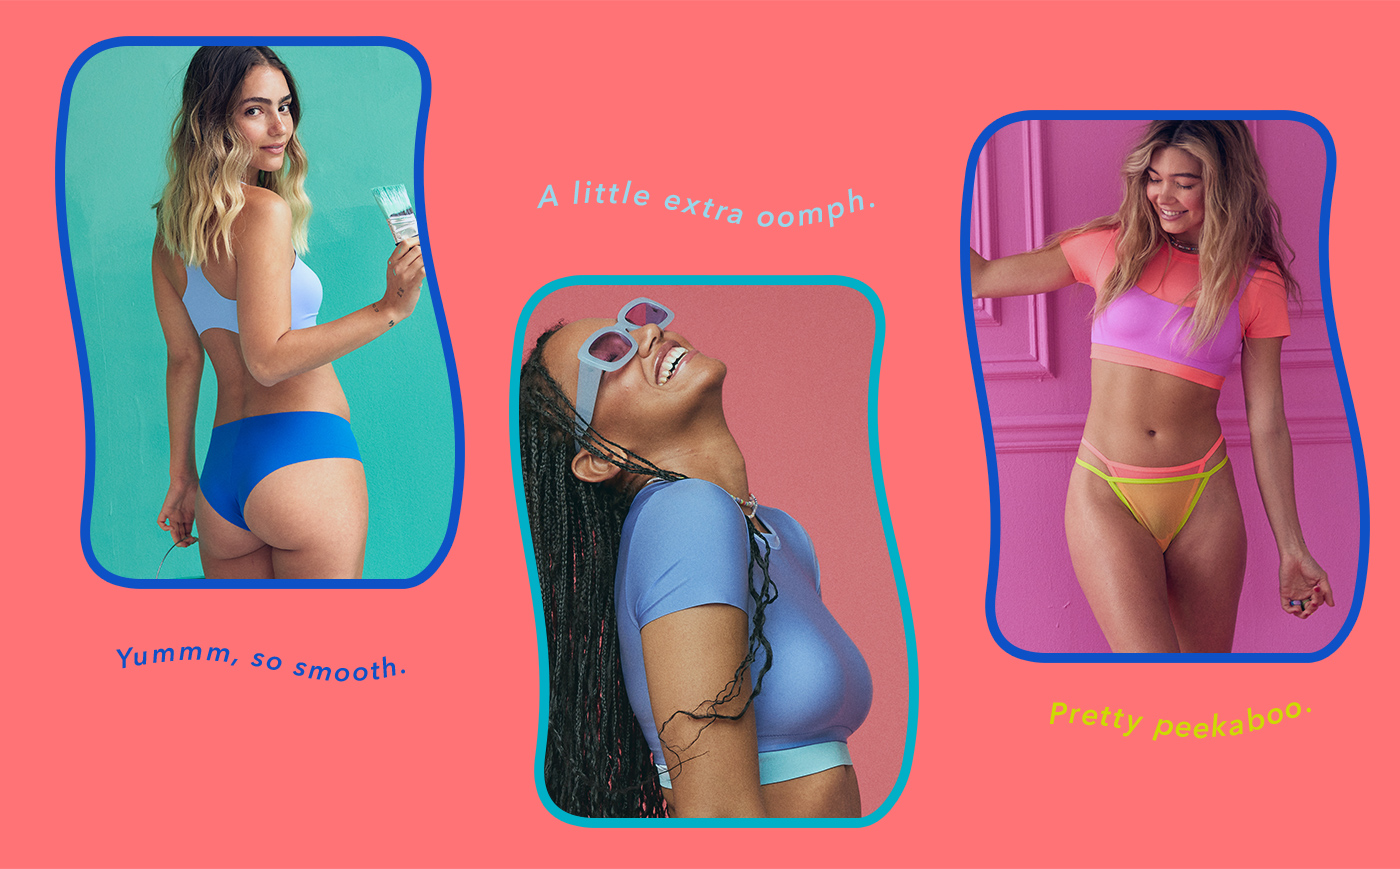 Aerie SMOOTHEZ review part 2 #aerie #aeriereal #aeriesmoothez